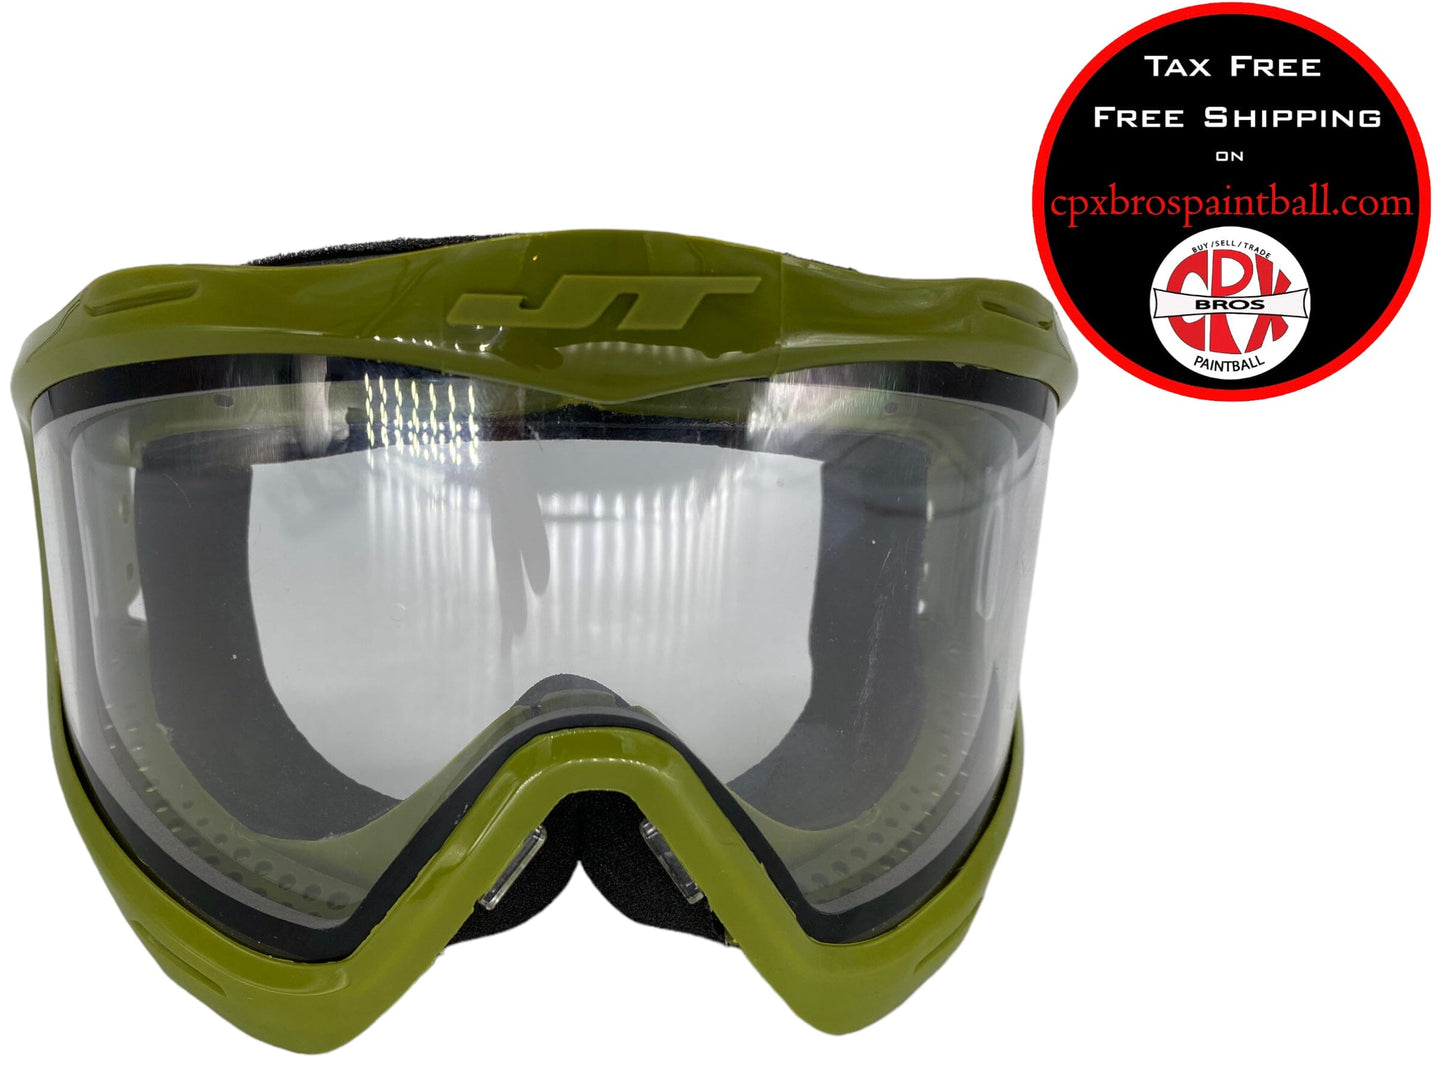 Used Jt Goggle Mask Frames and Lens Paintball Gun from CPXBrosPaintball Buy/Sell/Trade Paintball Markers, Paintball Hoppers, Paintball Masks, and Hormesis Headbands